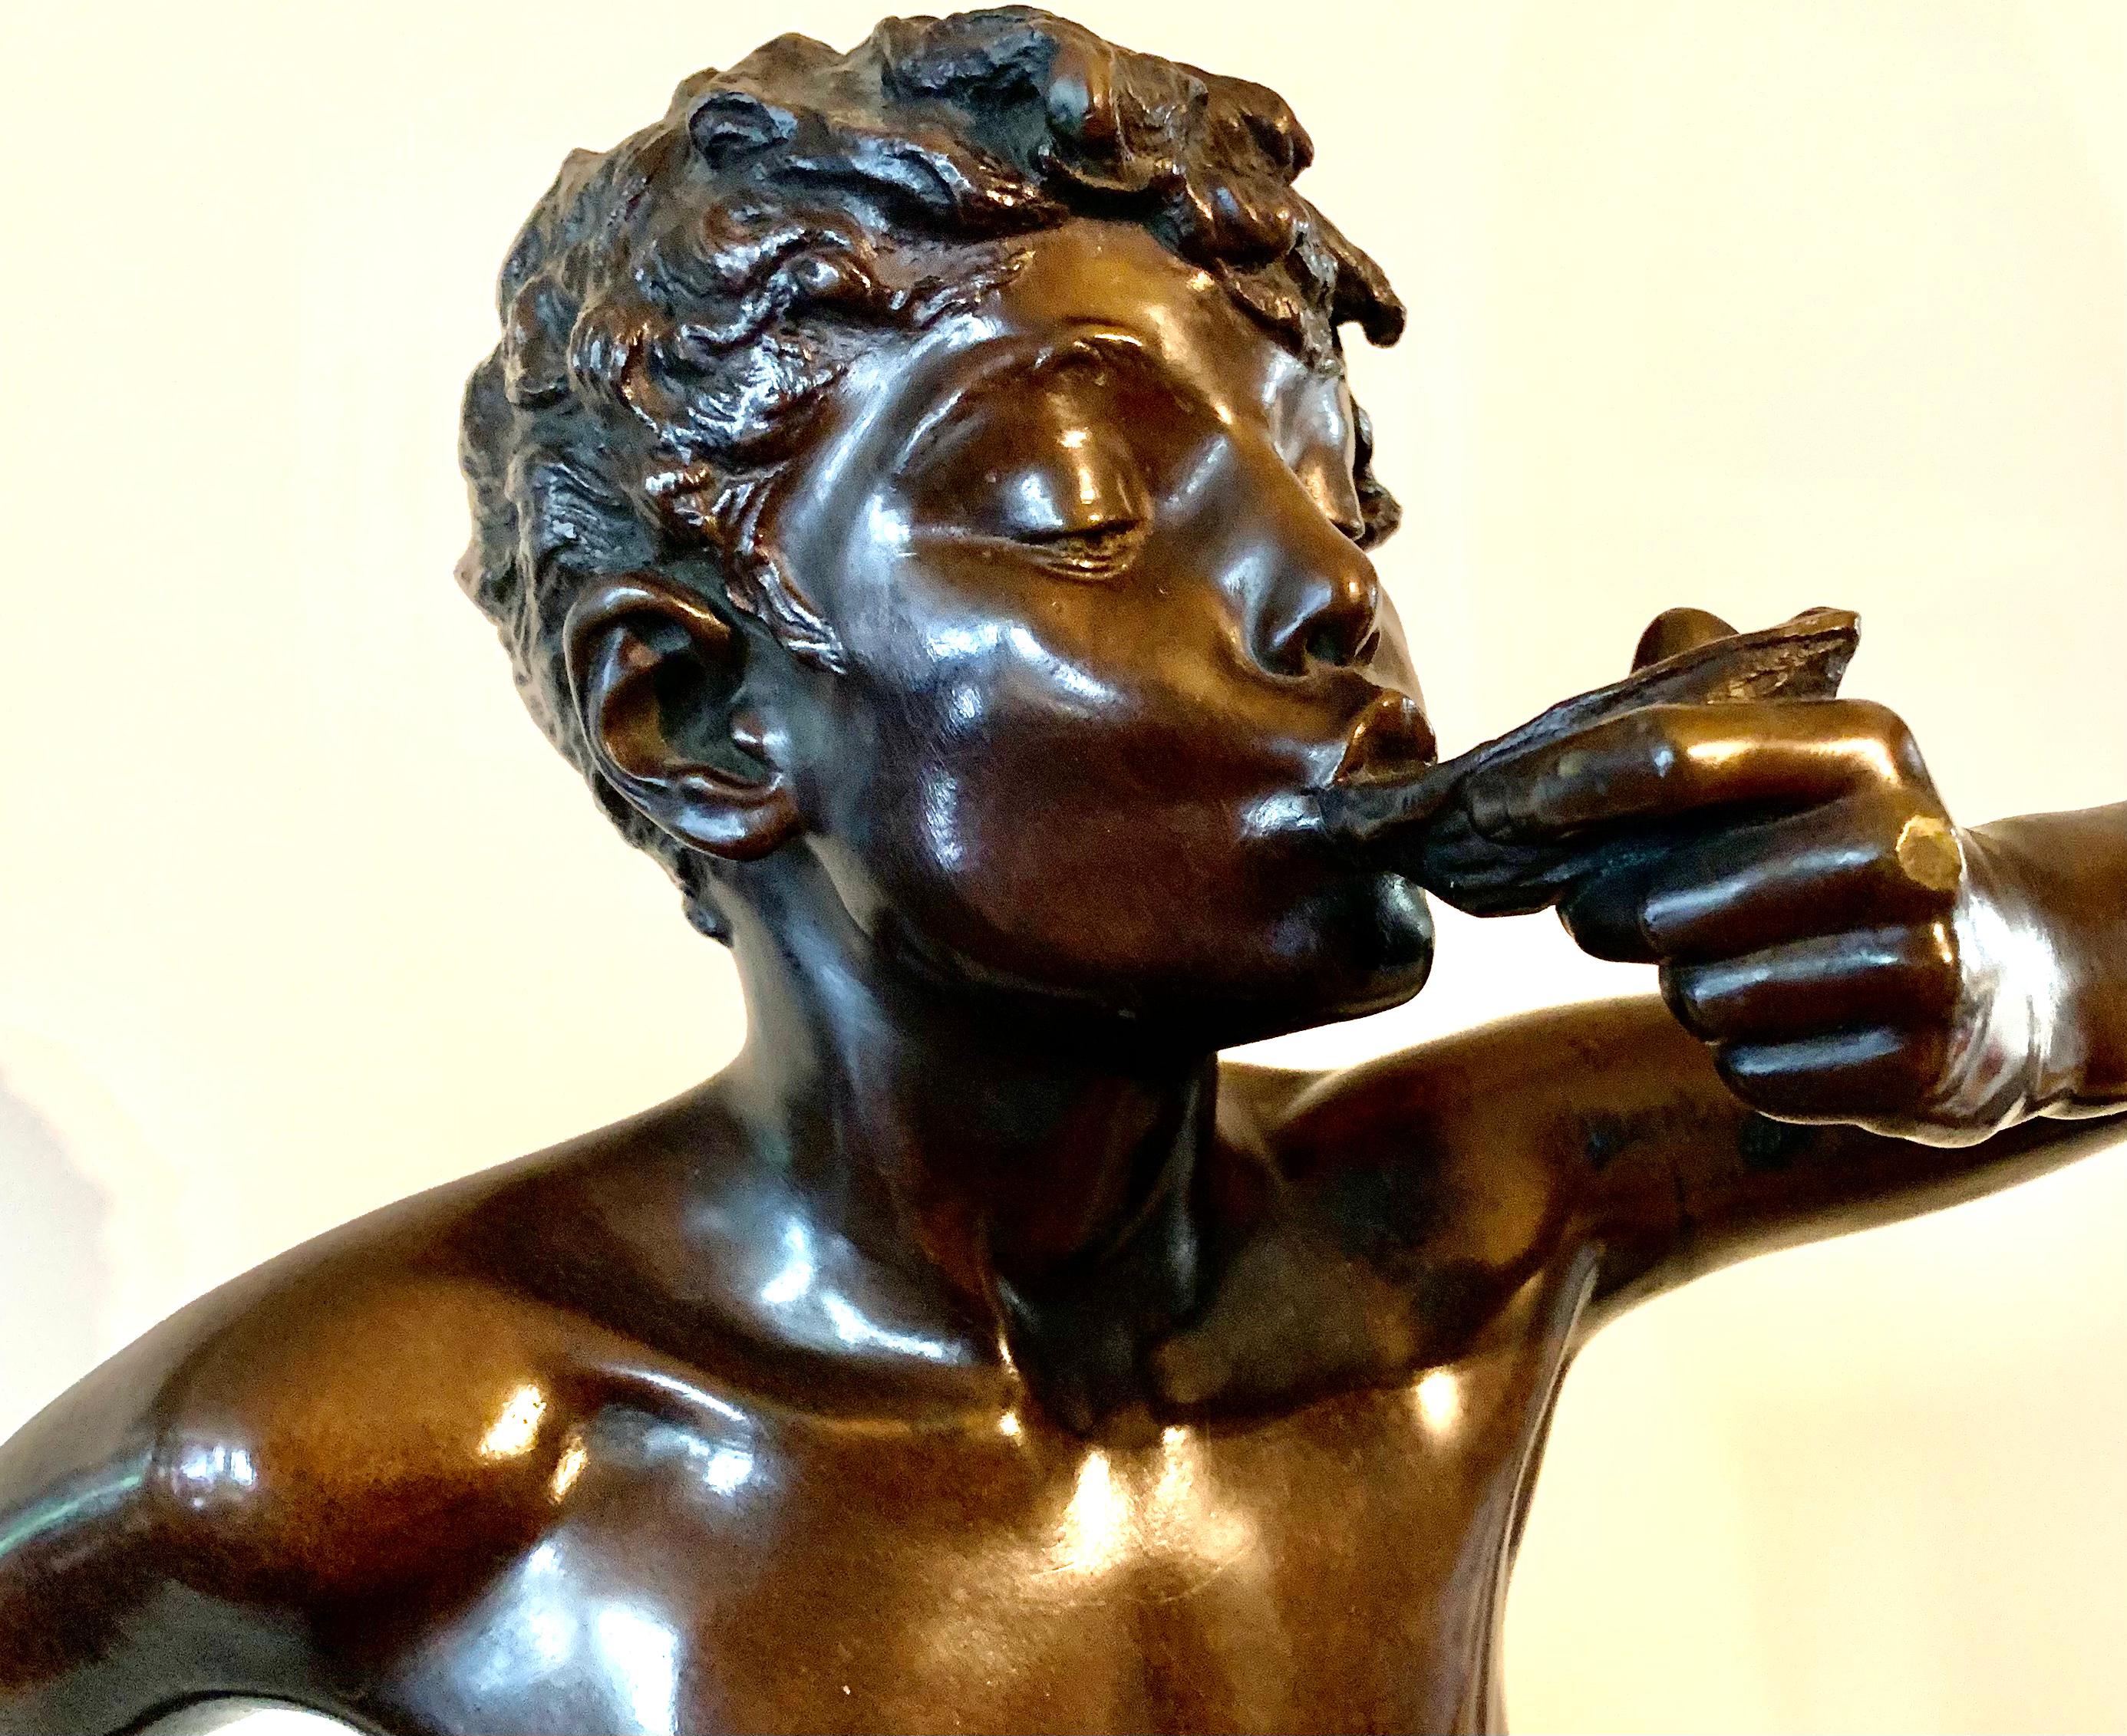 Large Edouard Drouot, Siot-Decauville Fondeur Paris patinated bronze sculpture of a youth enjoying an oyster. The young boy stands on a rock formation, leaning forward to avoid the oyster juices on his body, with his left arm raised to his mouth